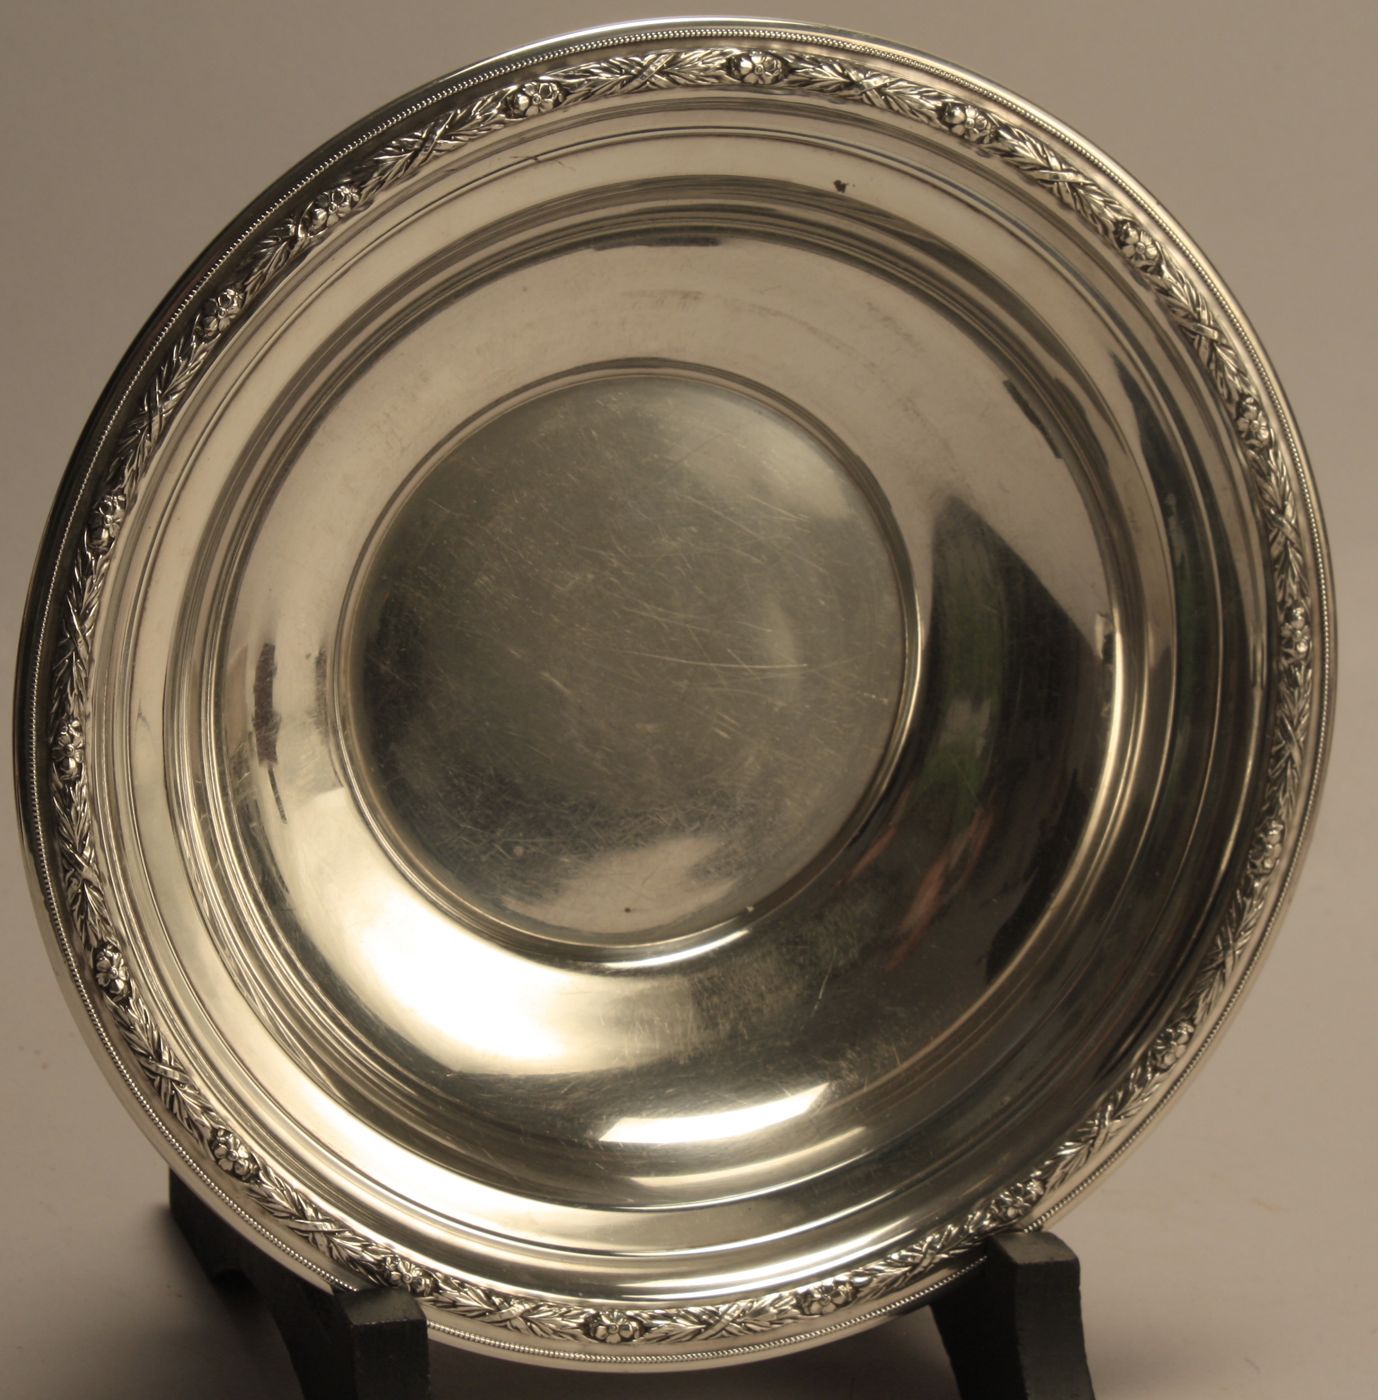 WALLACE SILVER CO. STERLING SILVER BOWLWith